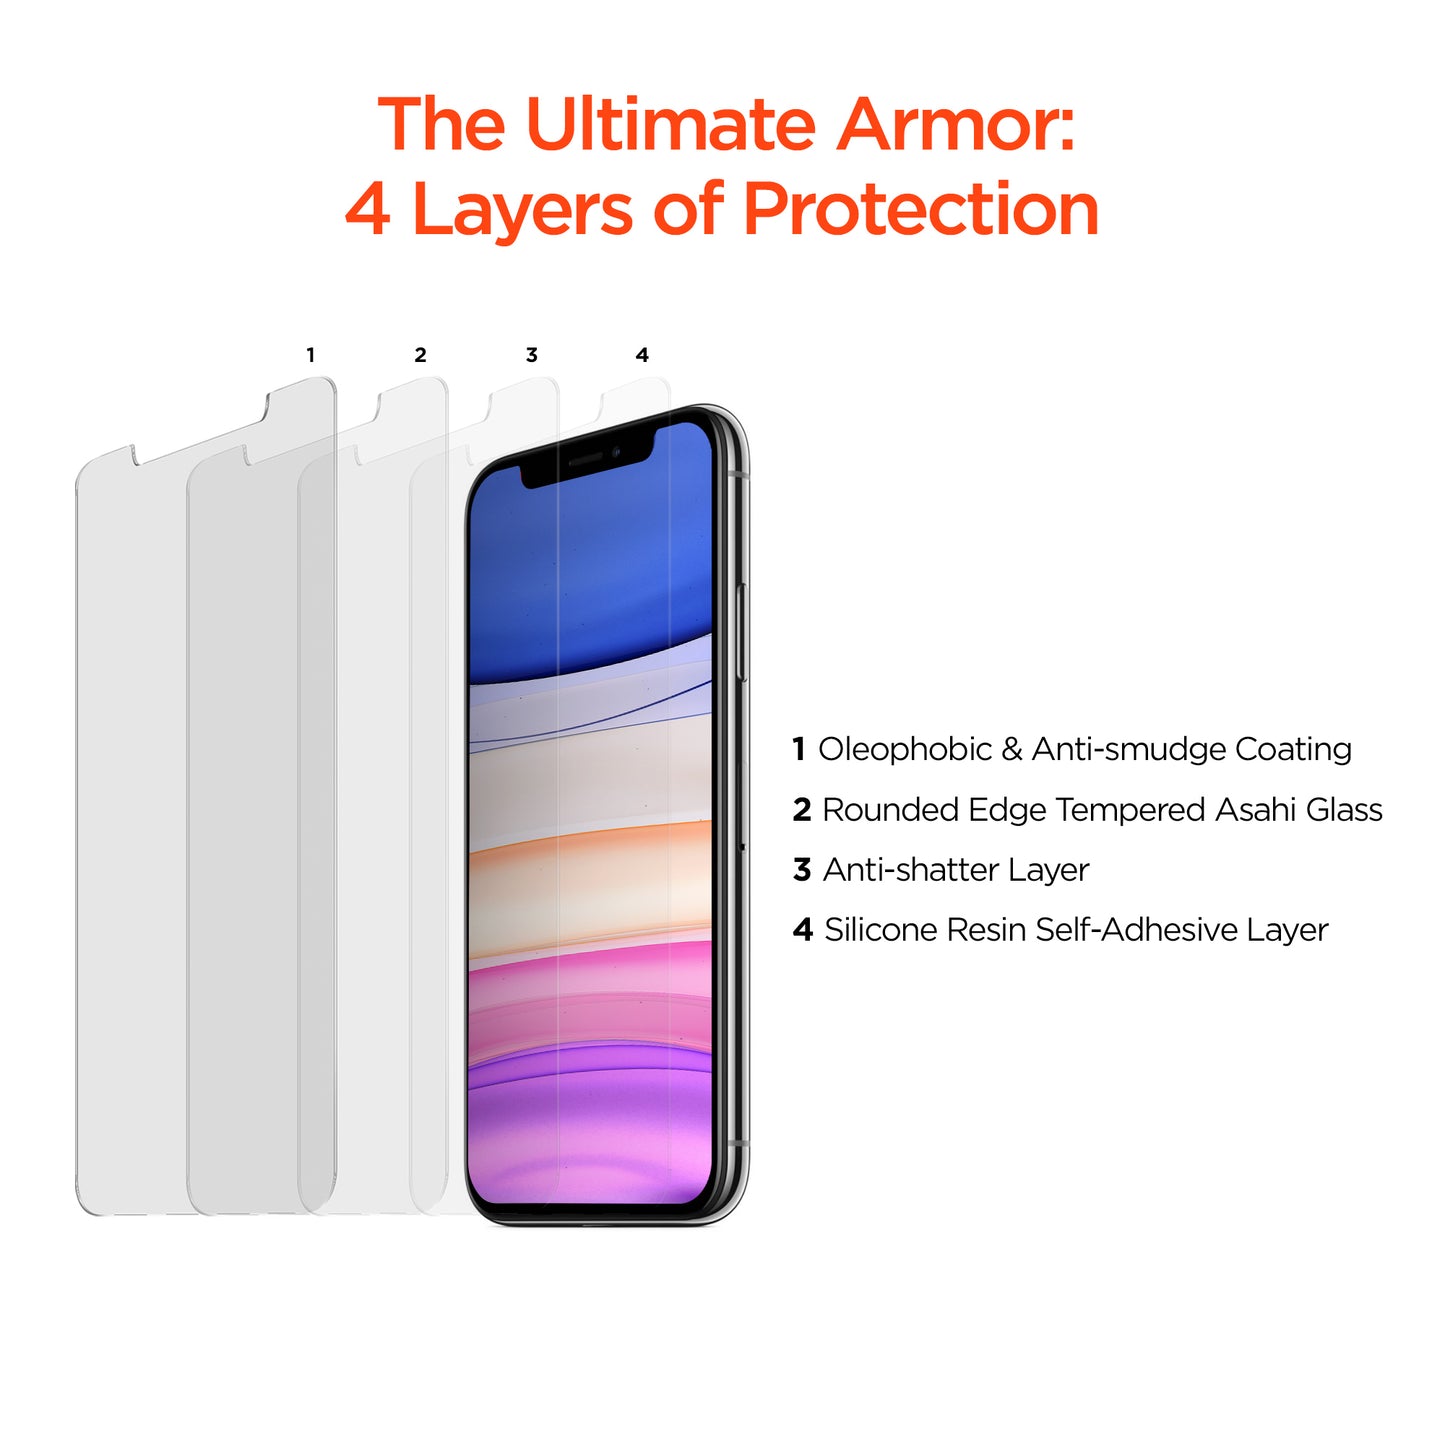 HyperGear HD Tempered Glass Screen Protector for iPhone 11 Pro MAX / XS MAX- 2 Pack